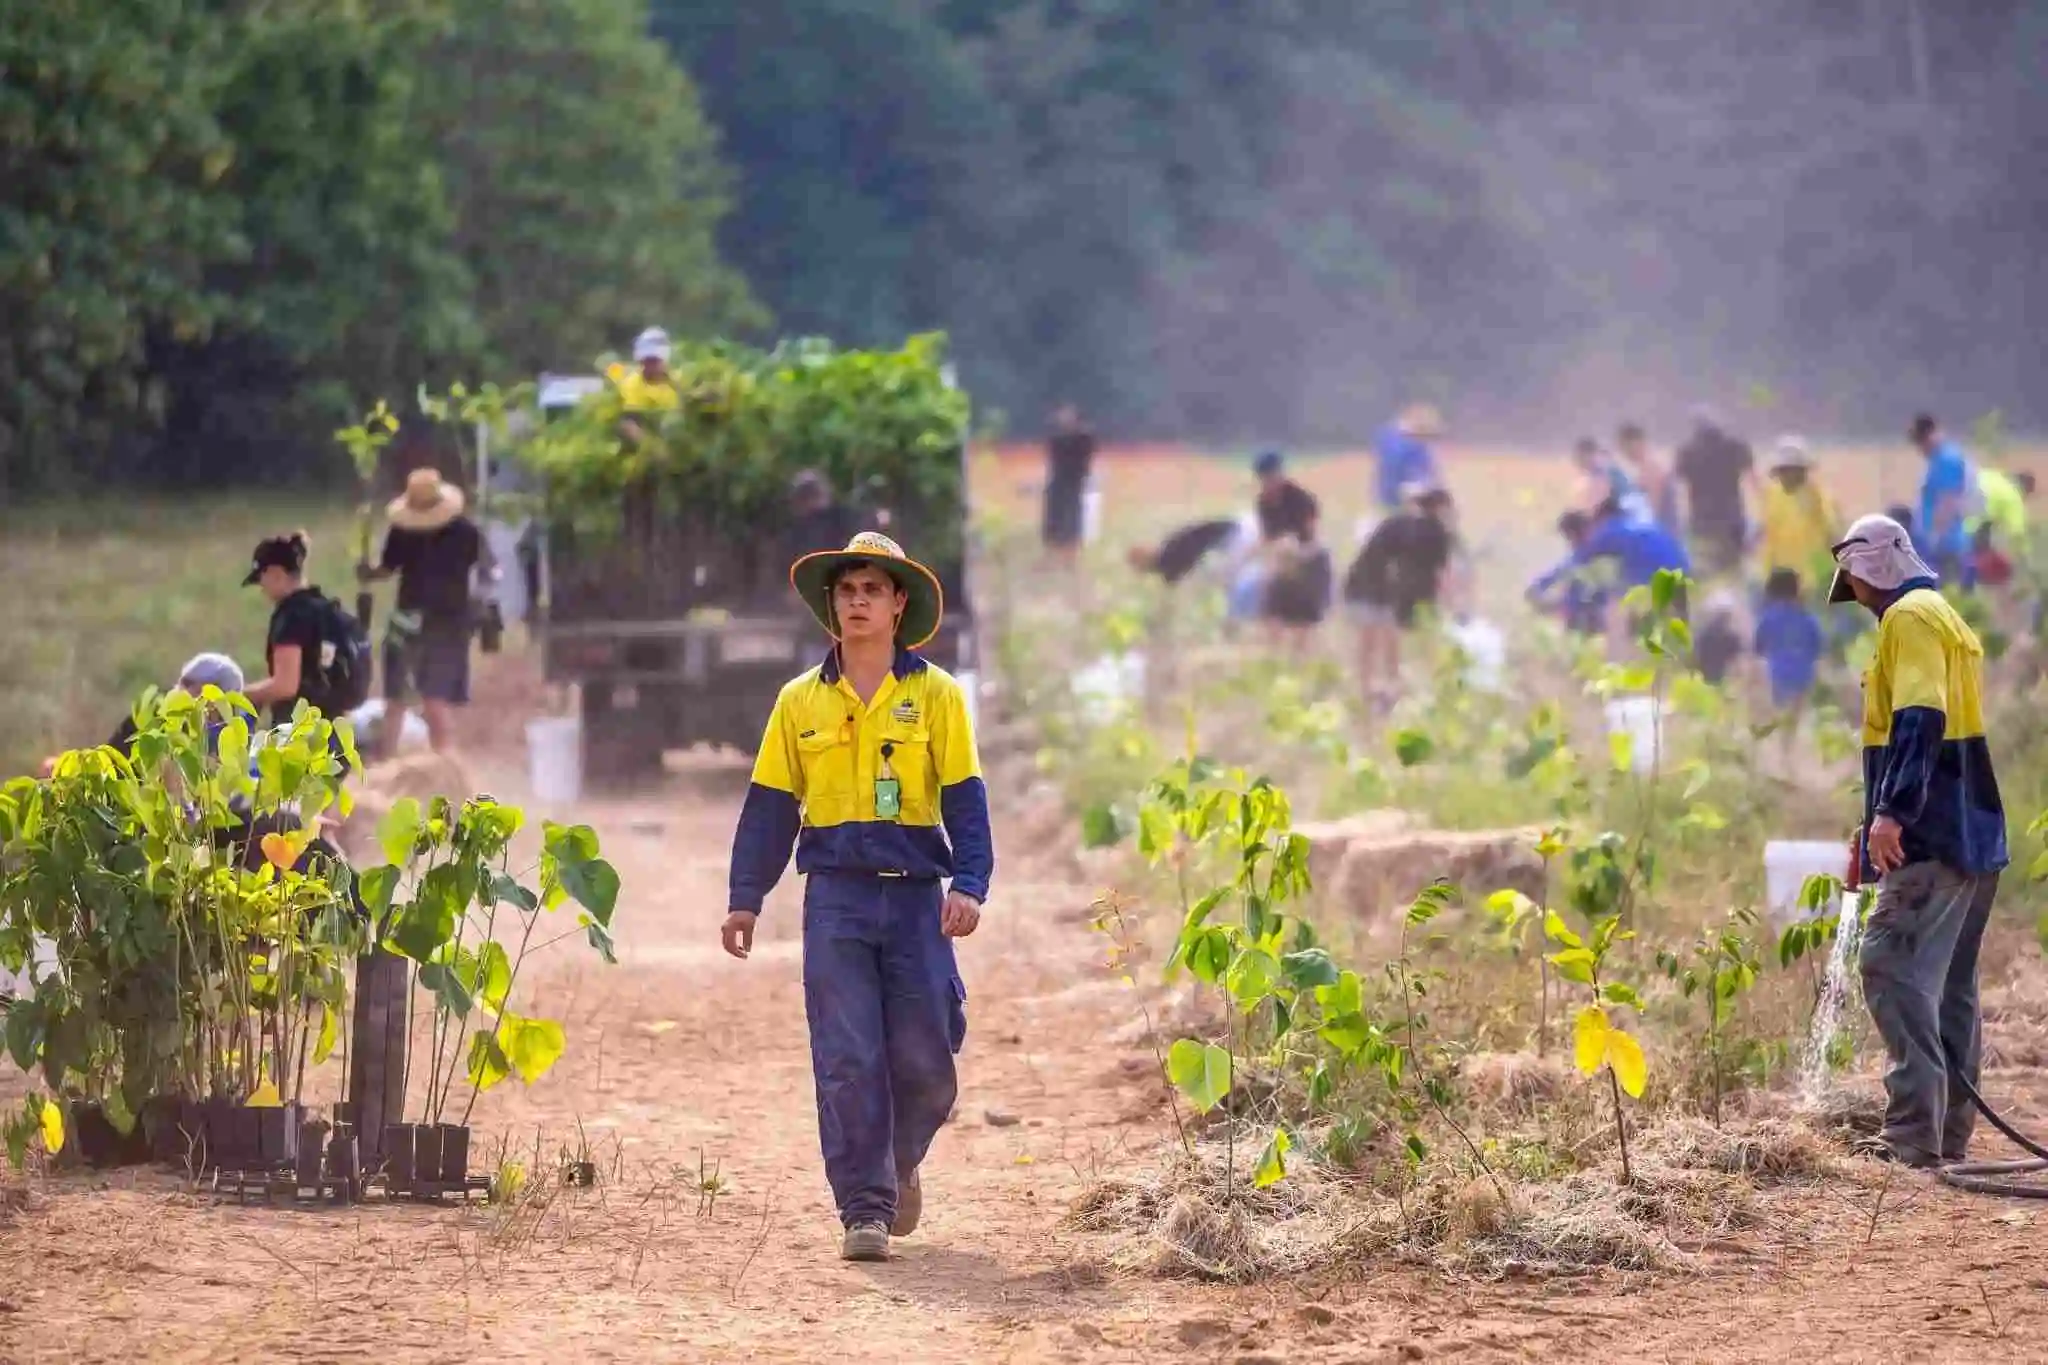 An open field of epople planting trees, in the foreground a person in high-vis walks toward the camera